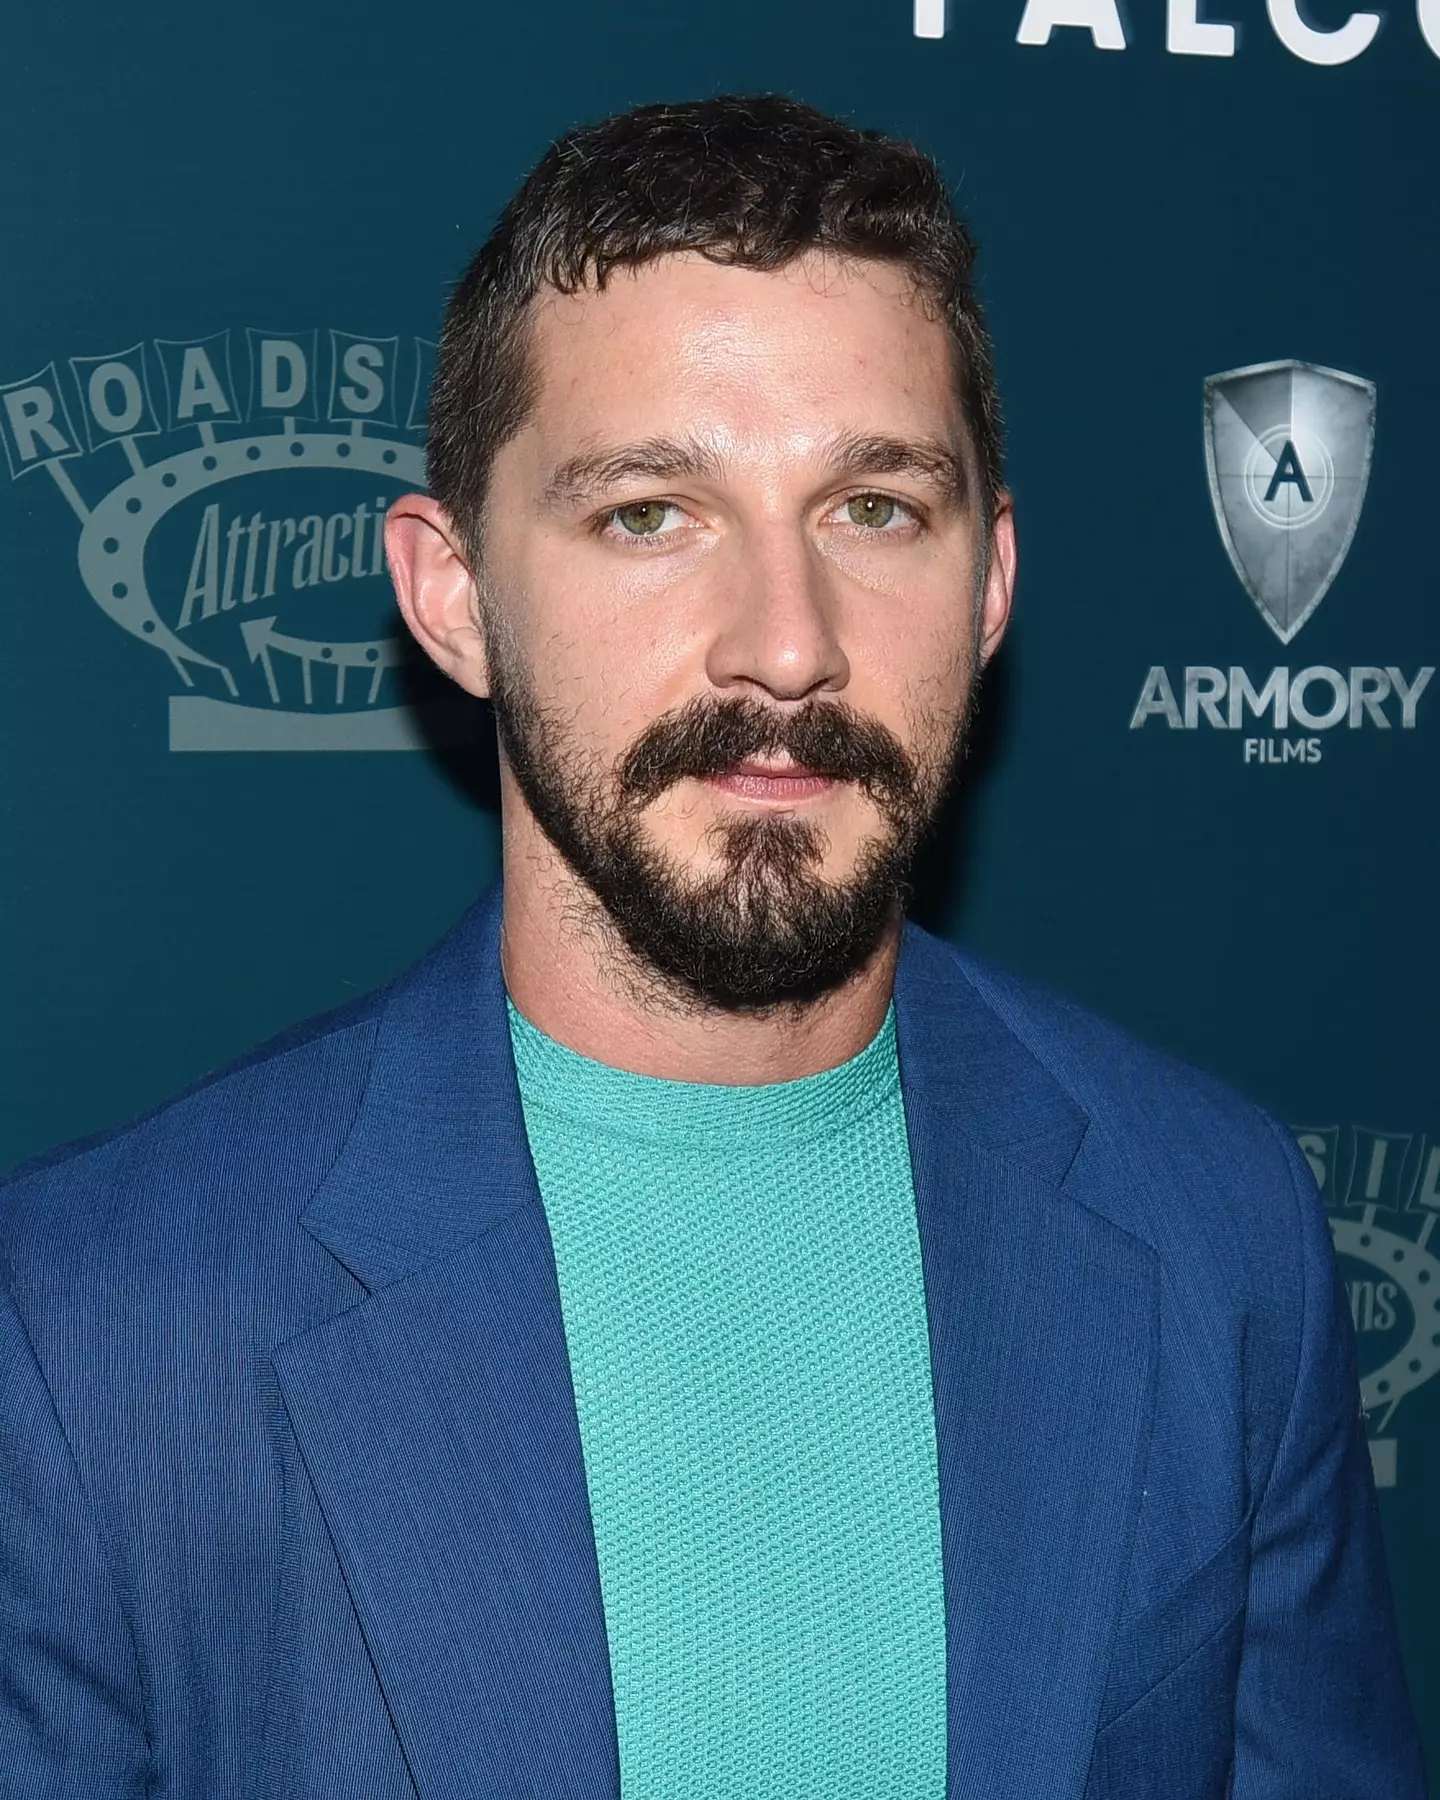 LaBeouf has admitted being unfaithful to all of his partners.